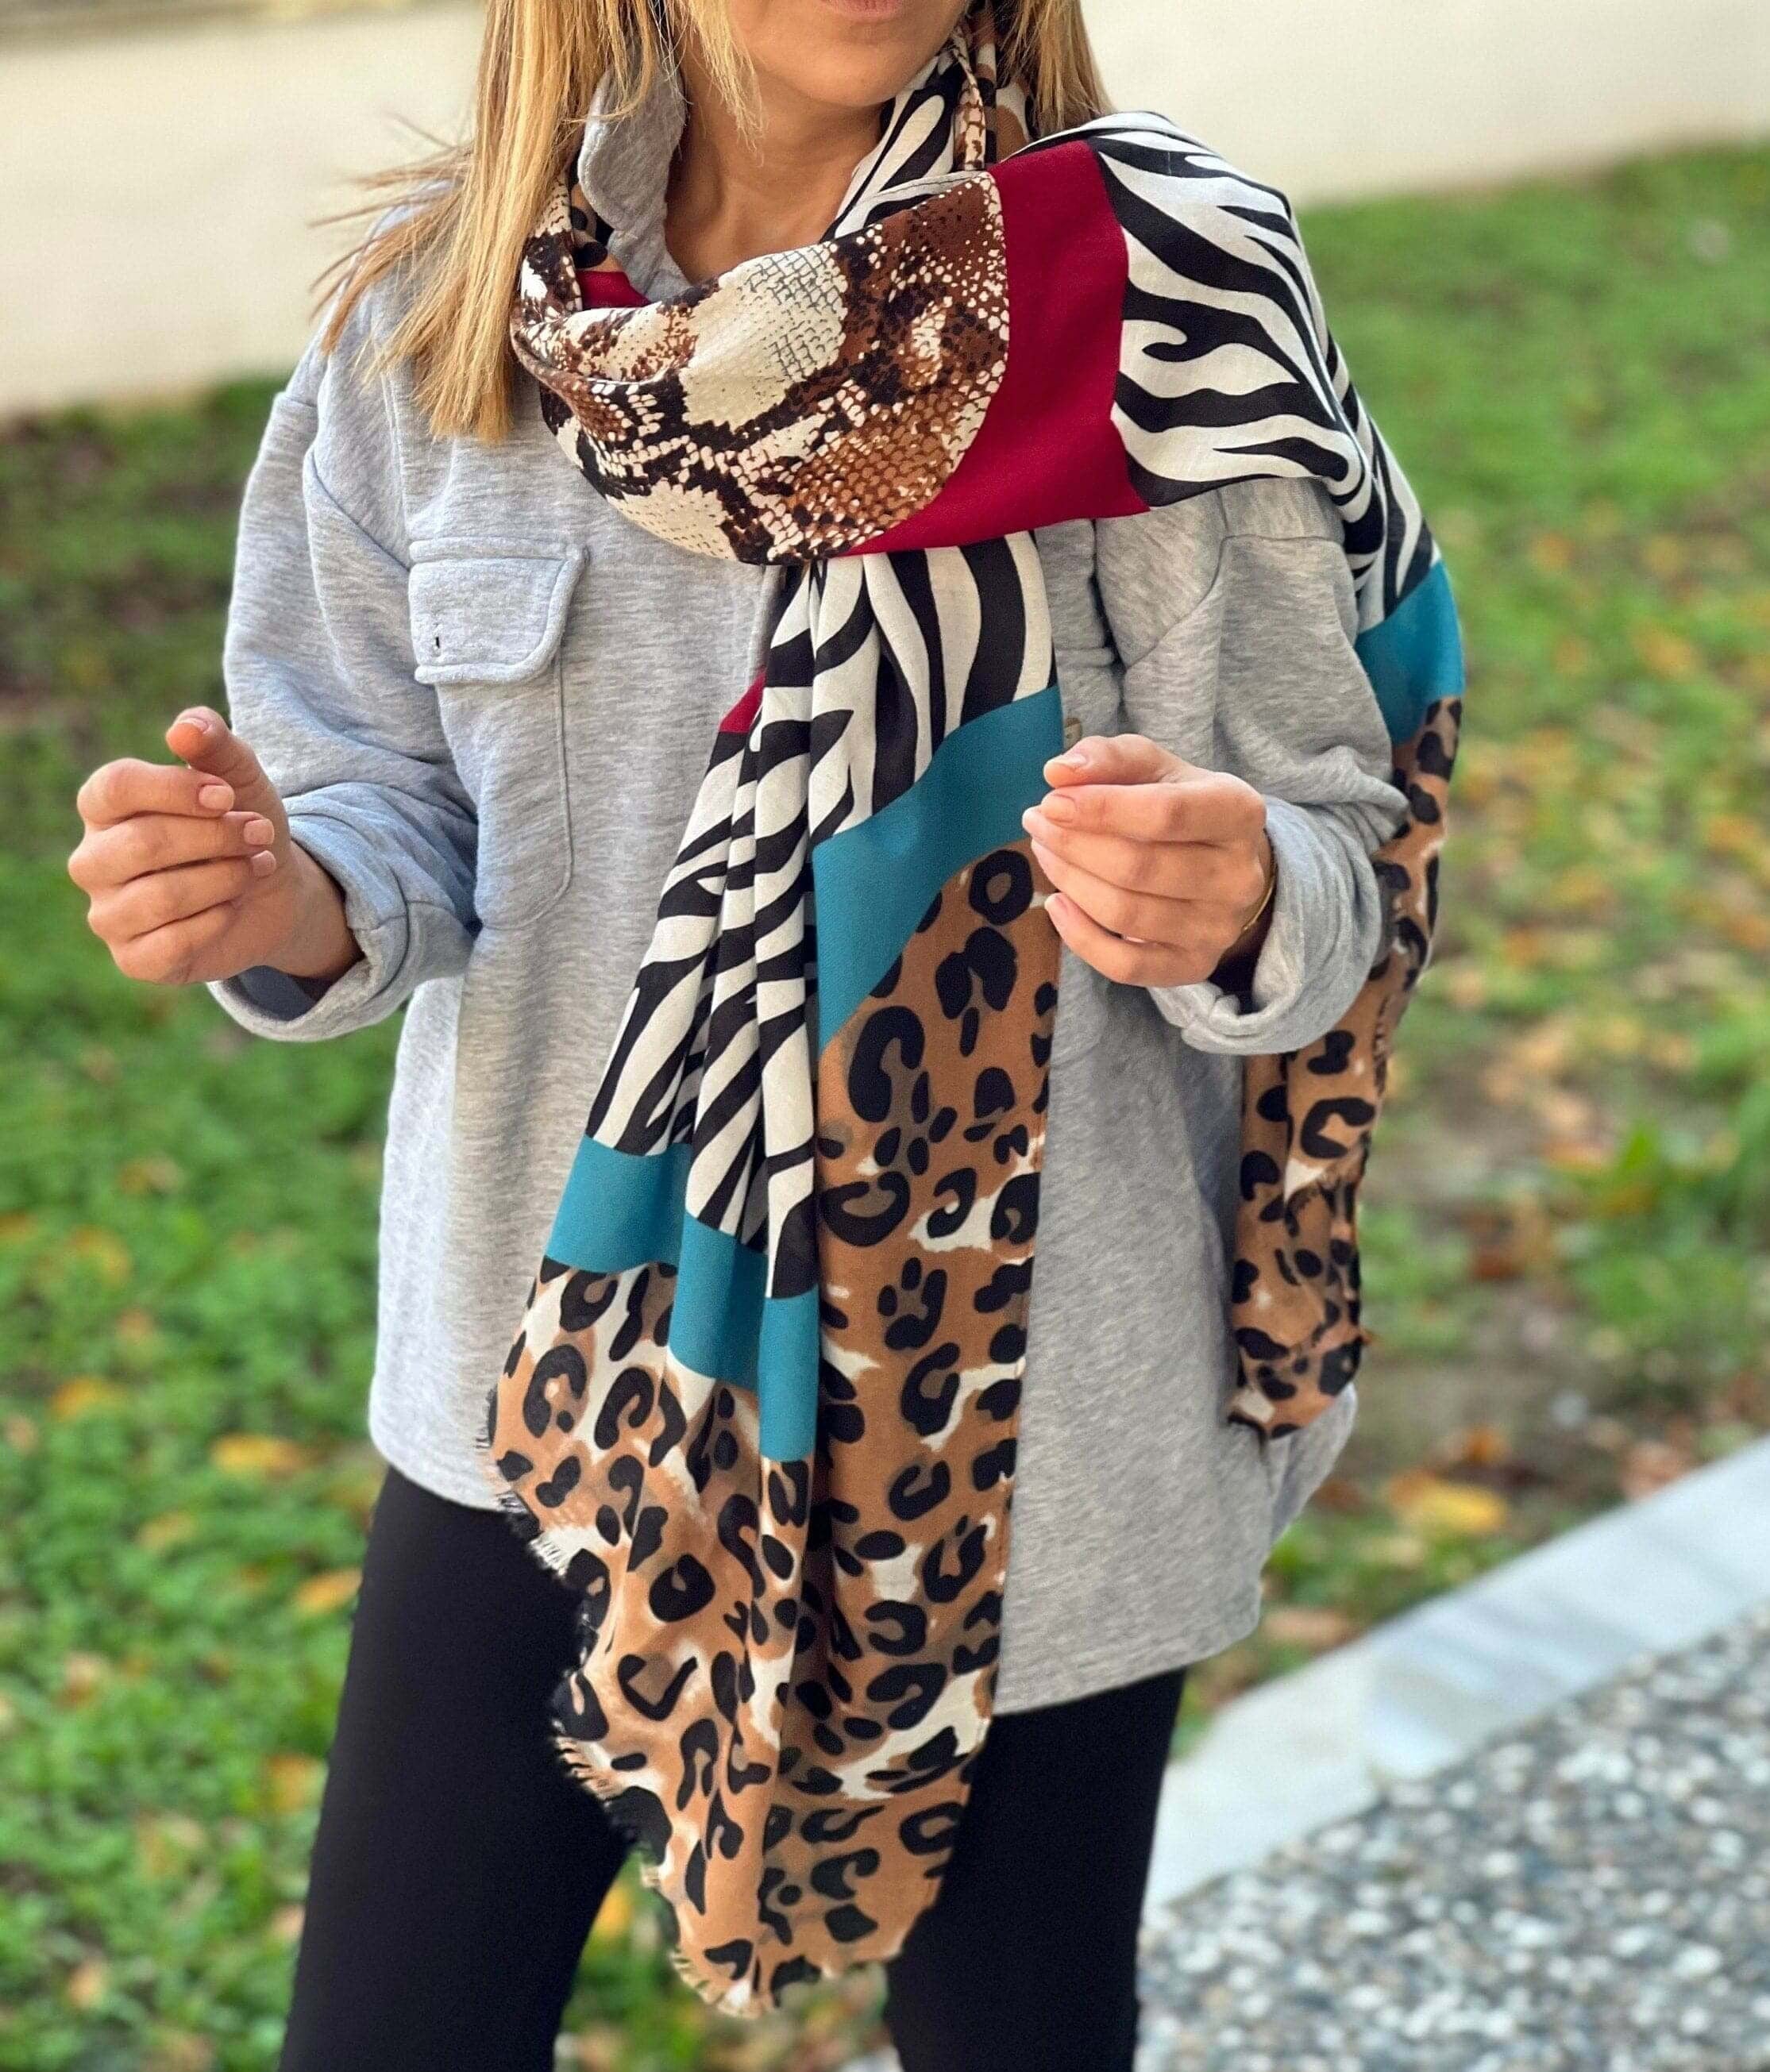 With its classic rectangular shape and bold animal print pattern, this scarf is sure to become a staple in your wardrobe. Pair it with jeans and a t-shirt for a casual look, or dress it up with a little black dress.